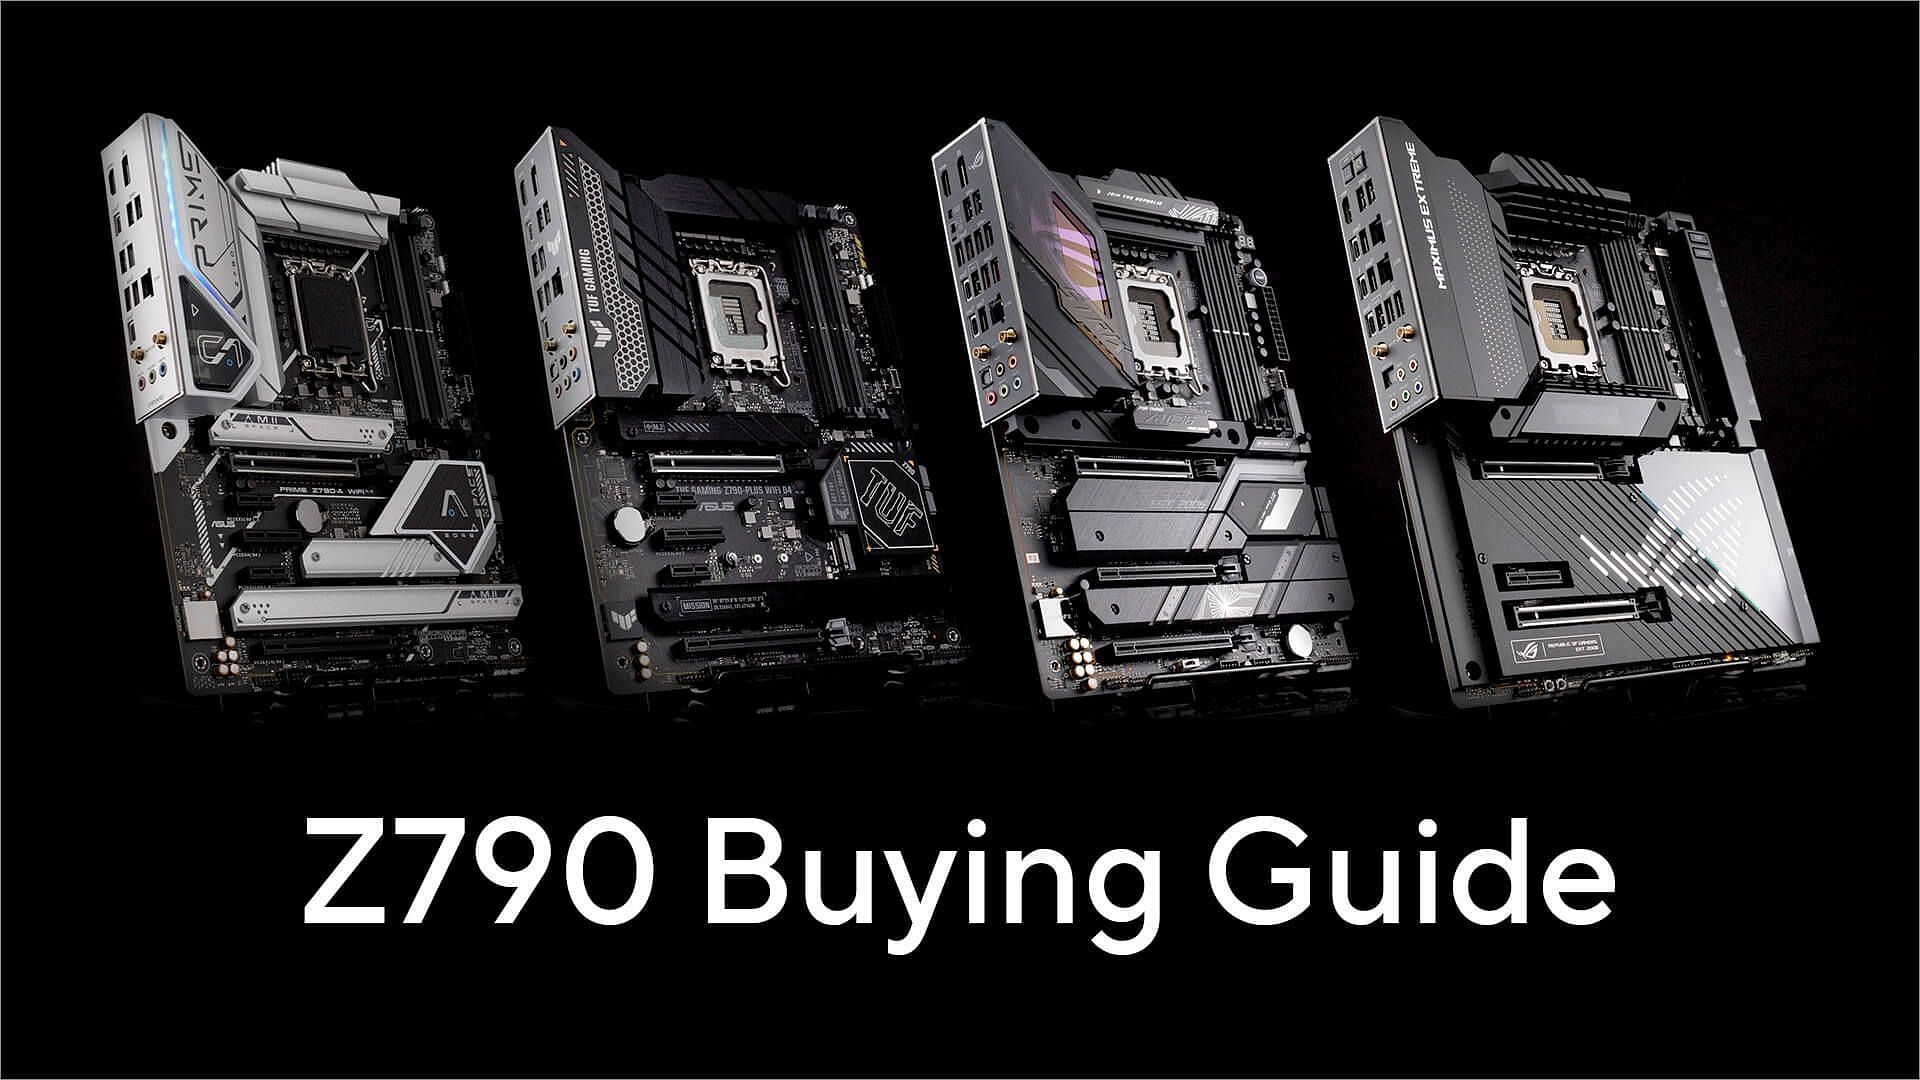 Newly launched ASUS Z790 motherboards (Image via ASUS)